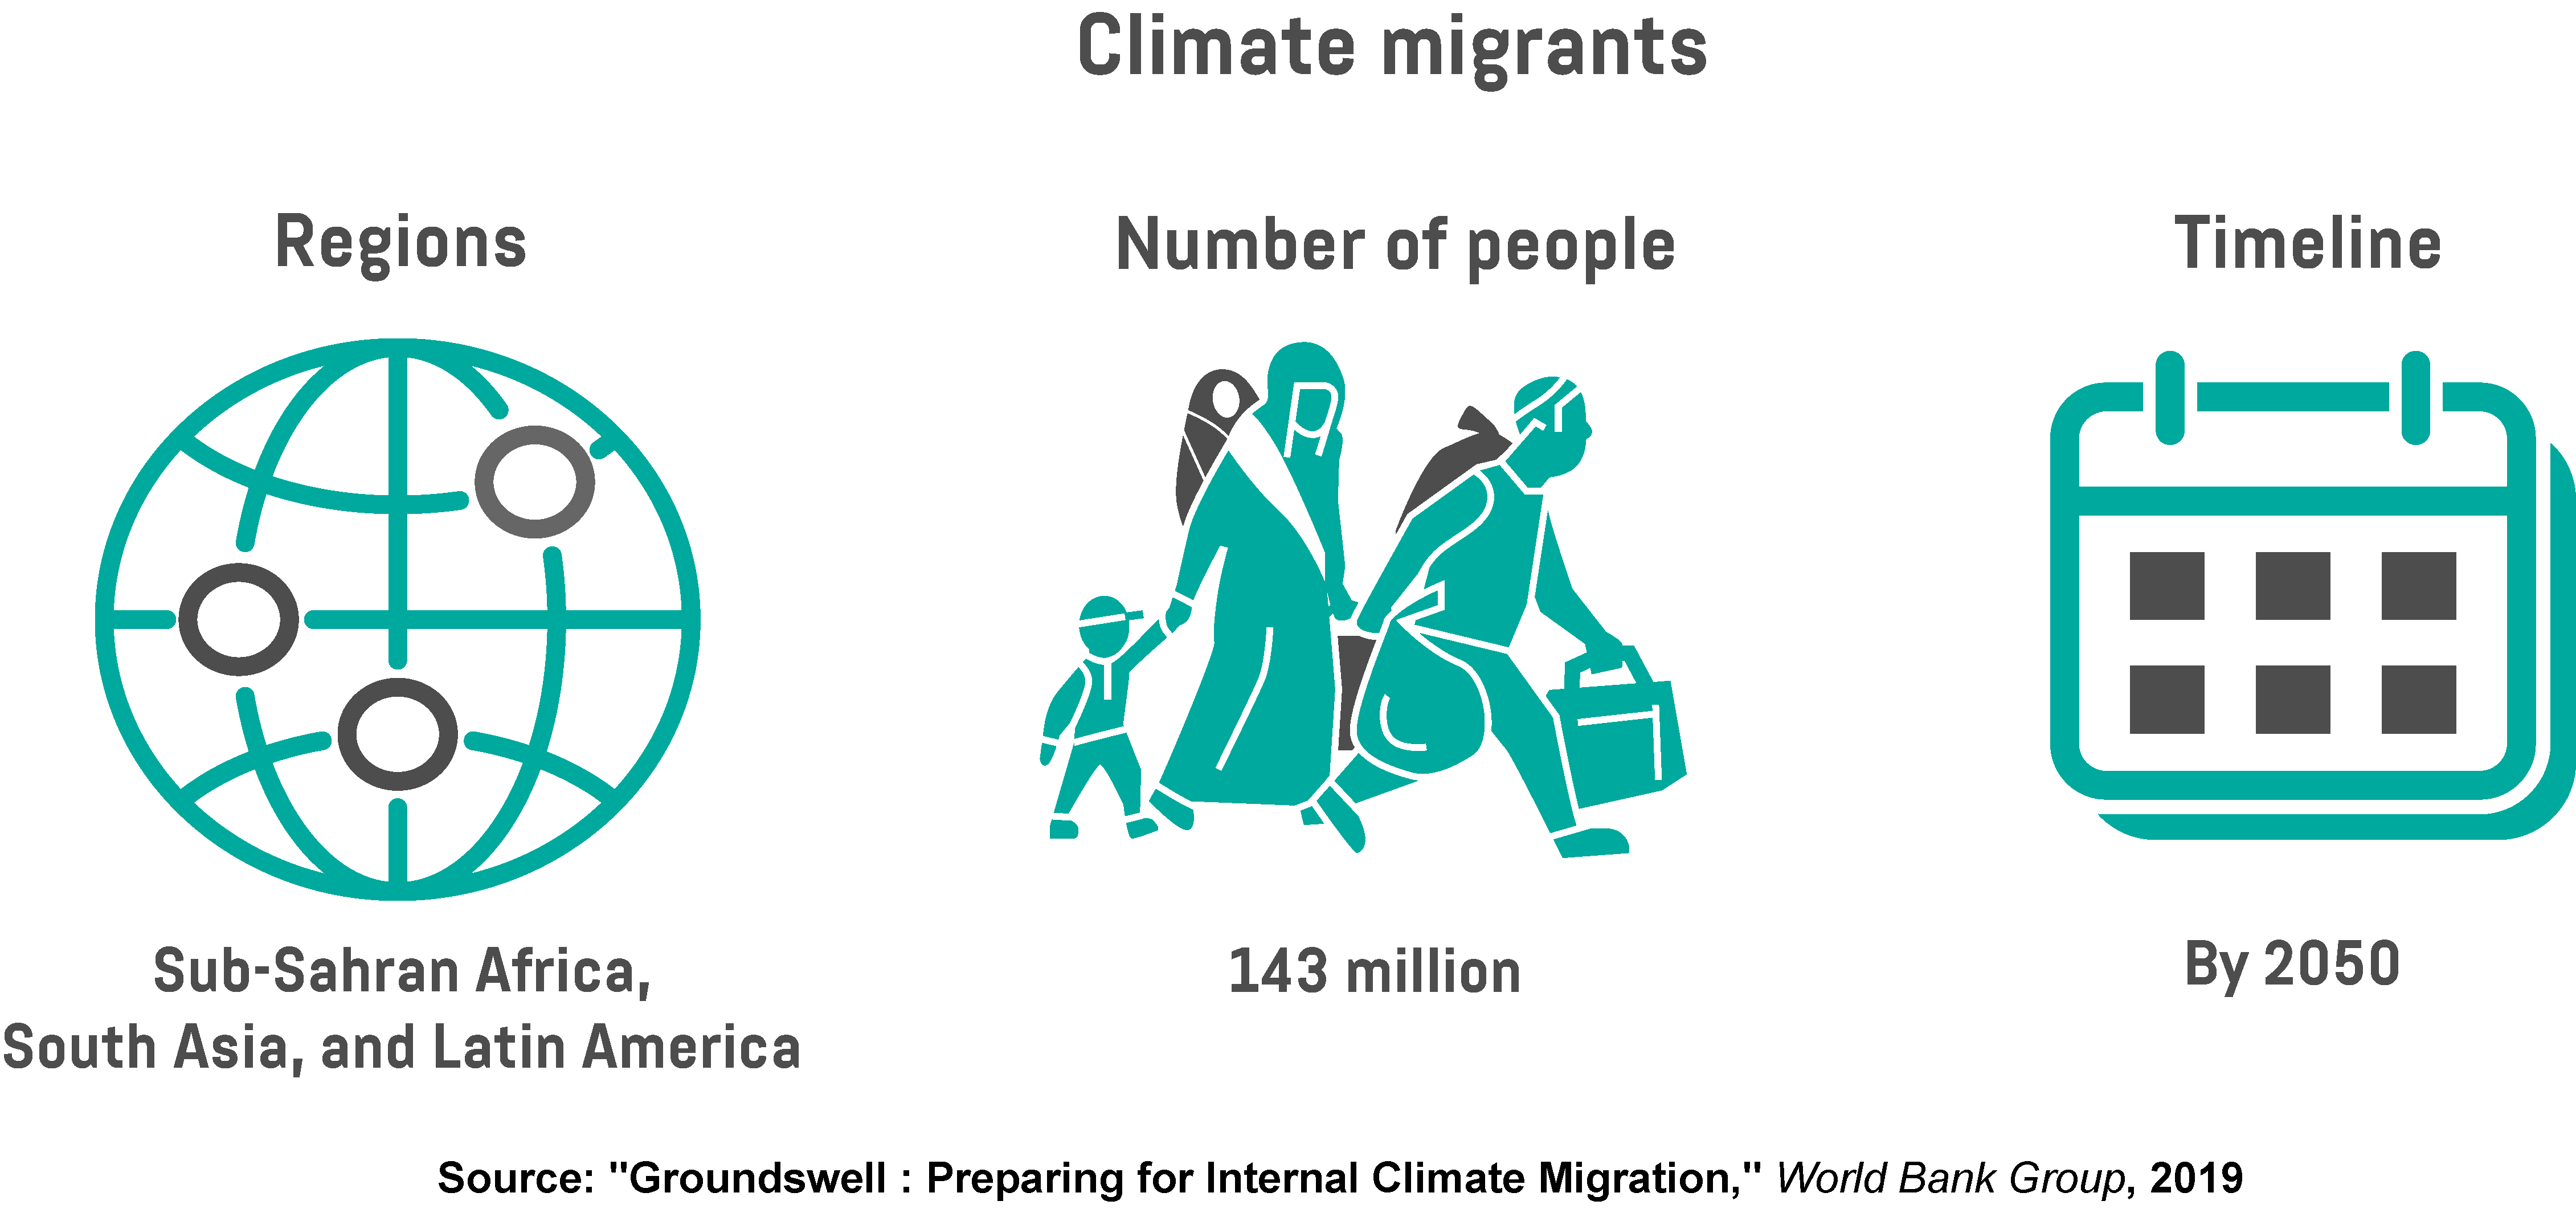 nfographic showing how many people are at risk of becoming affected by climate migration, and which regions could experience the biggest climate migration by 2050. 